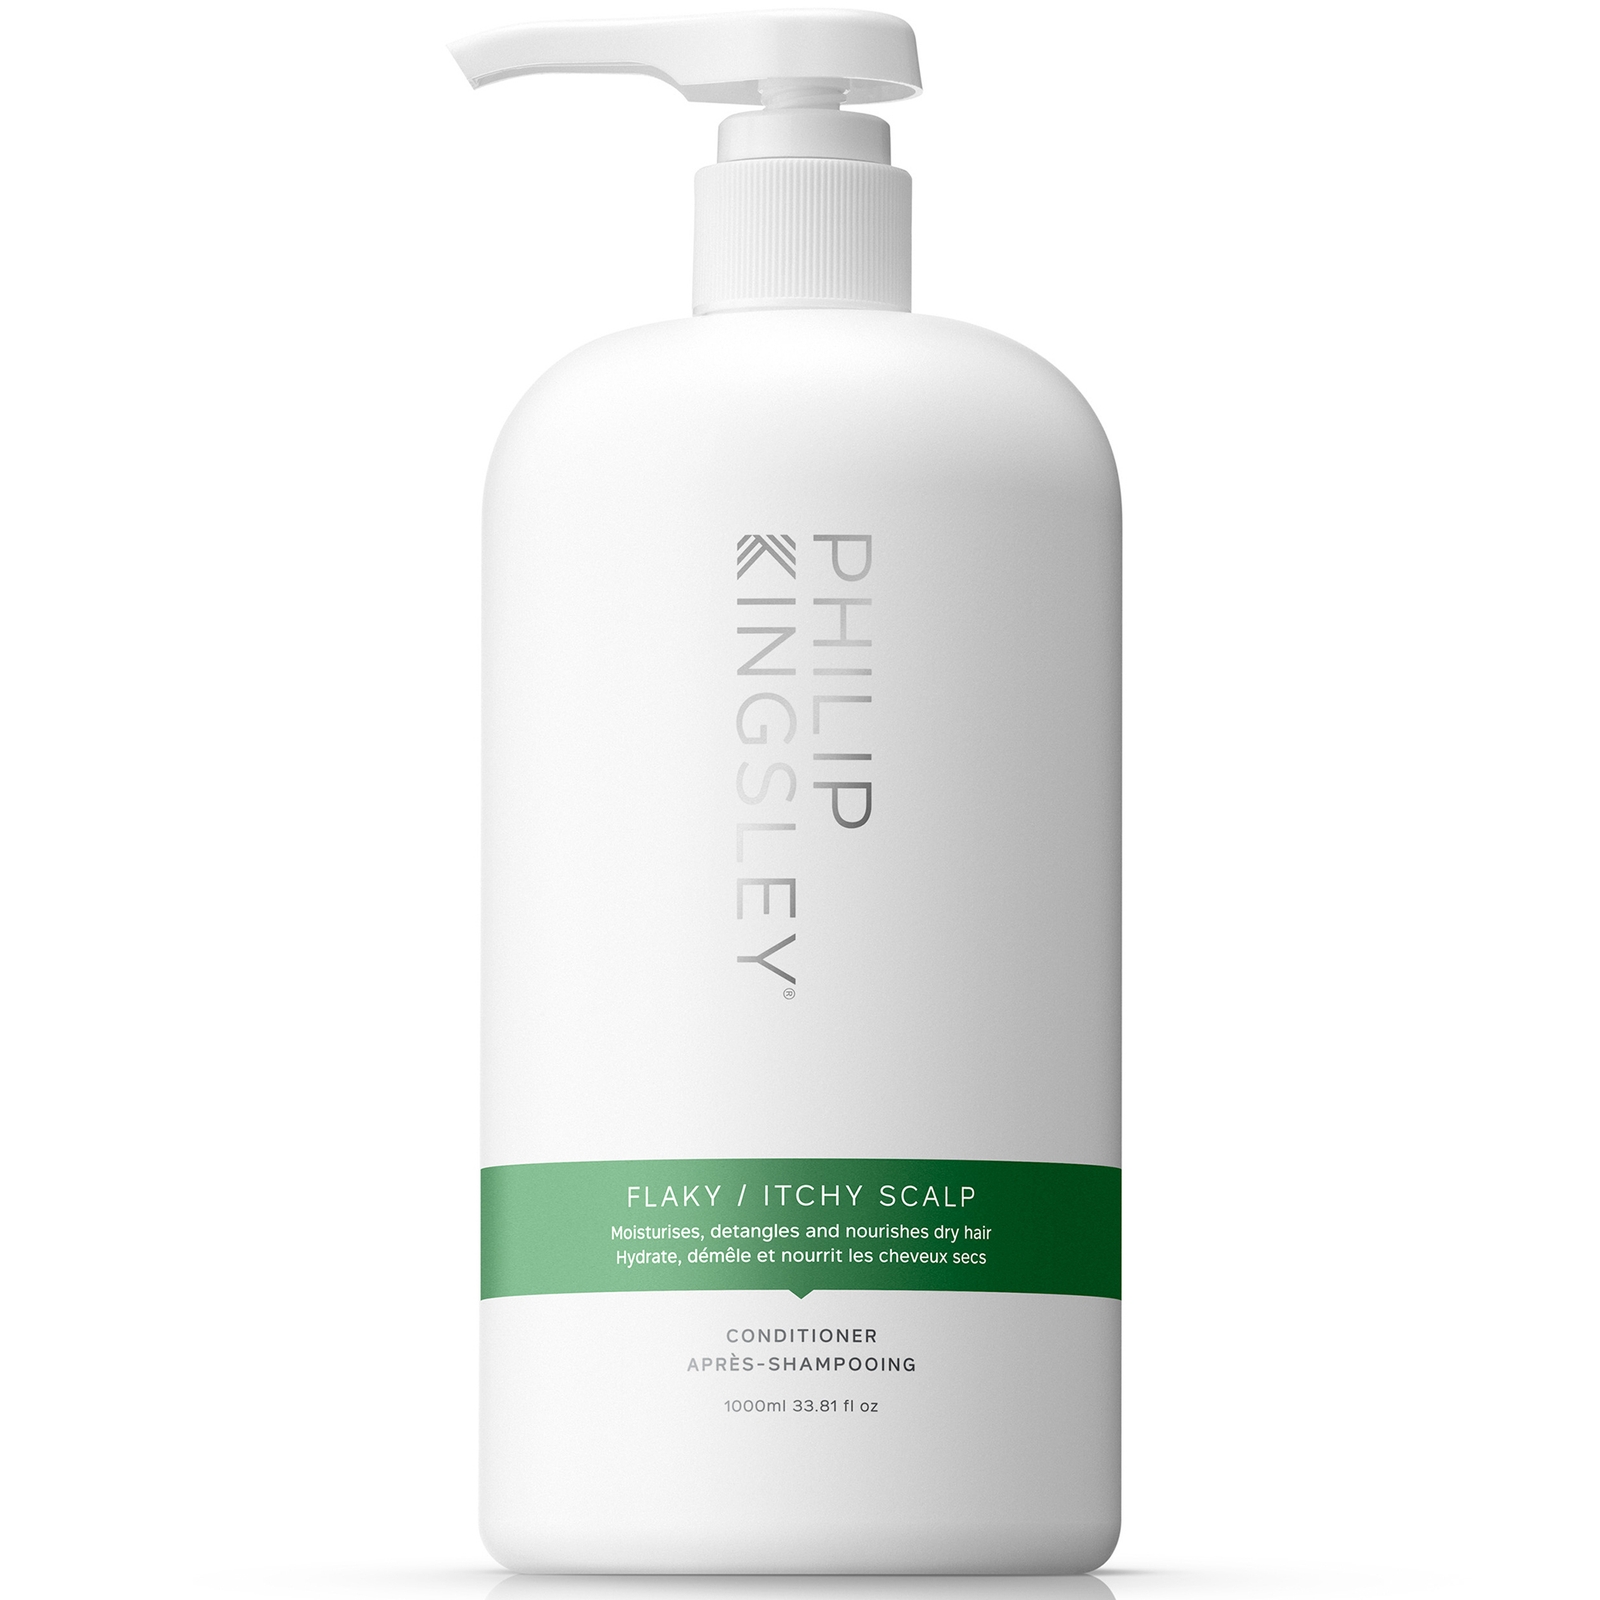 Philip Kingsley Flaky/Itchy Scalp Conditioner 1000ml (Worth PS135.00)